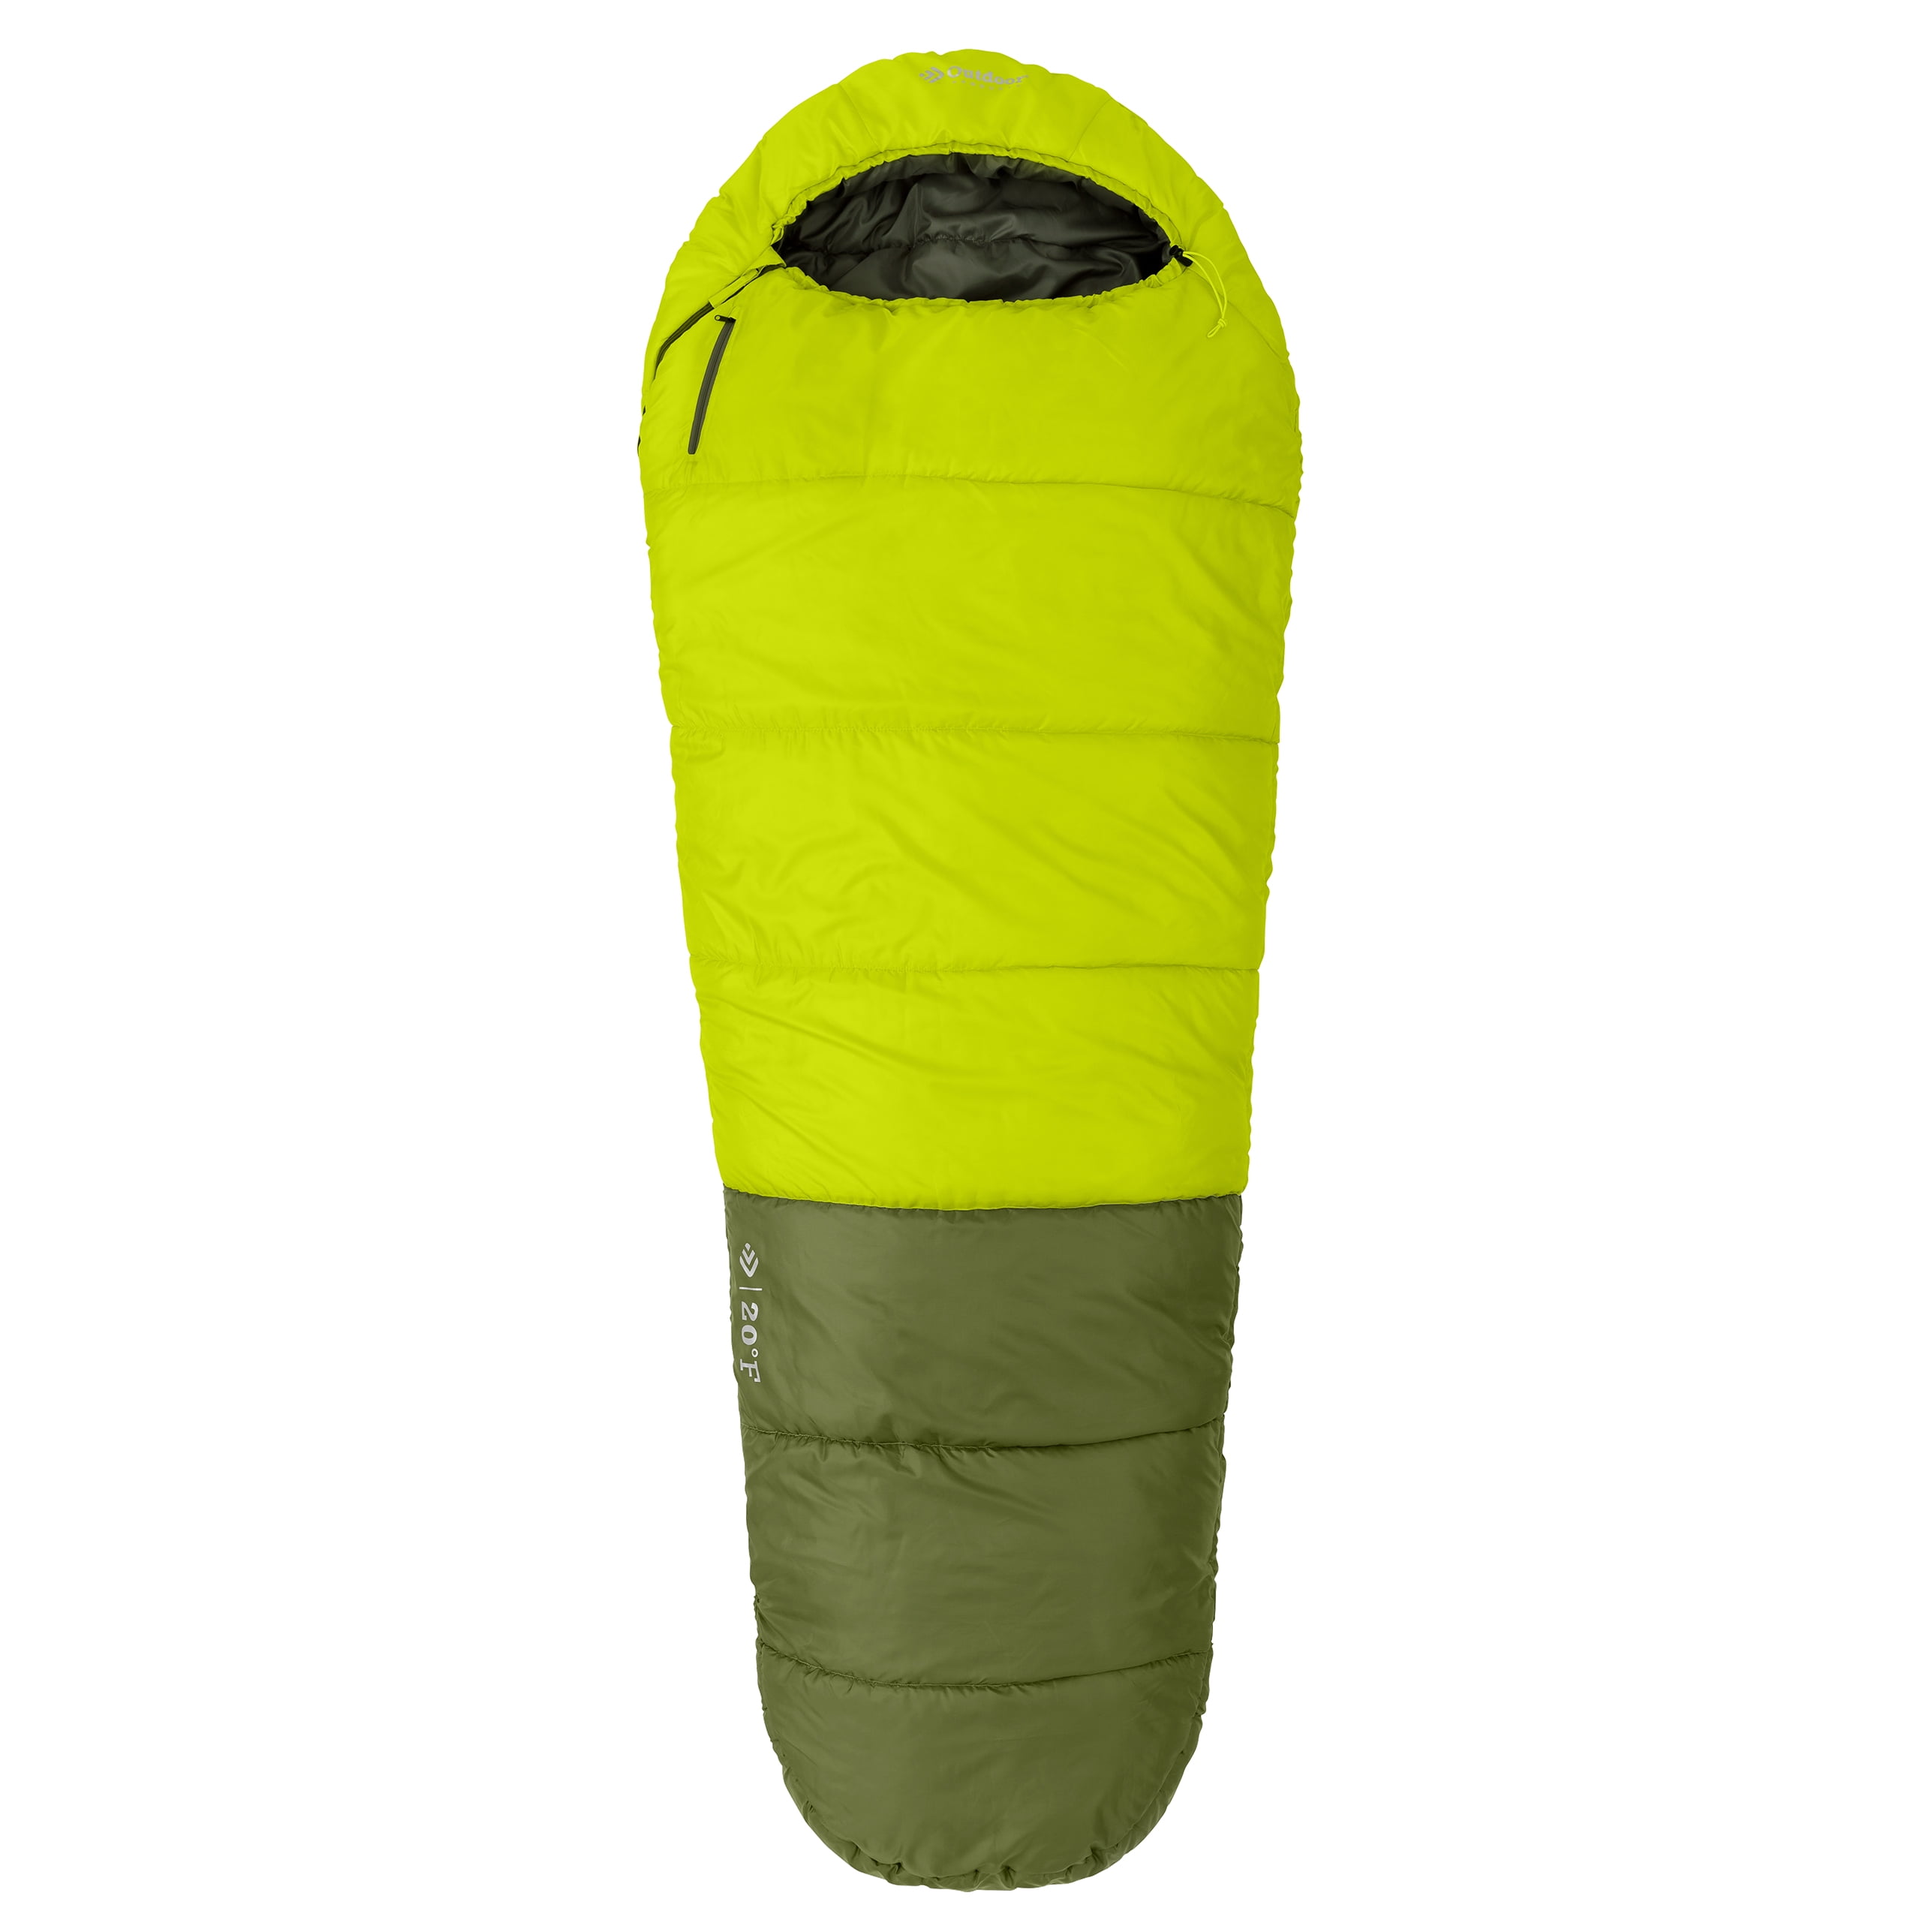 Adult Wearable Sleeping Bag Warmth Portable Outdoor Camping Camouflage L Suitable for 160-180 cm Extra Large Mummy Sleeping Bag